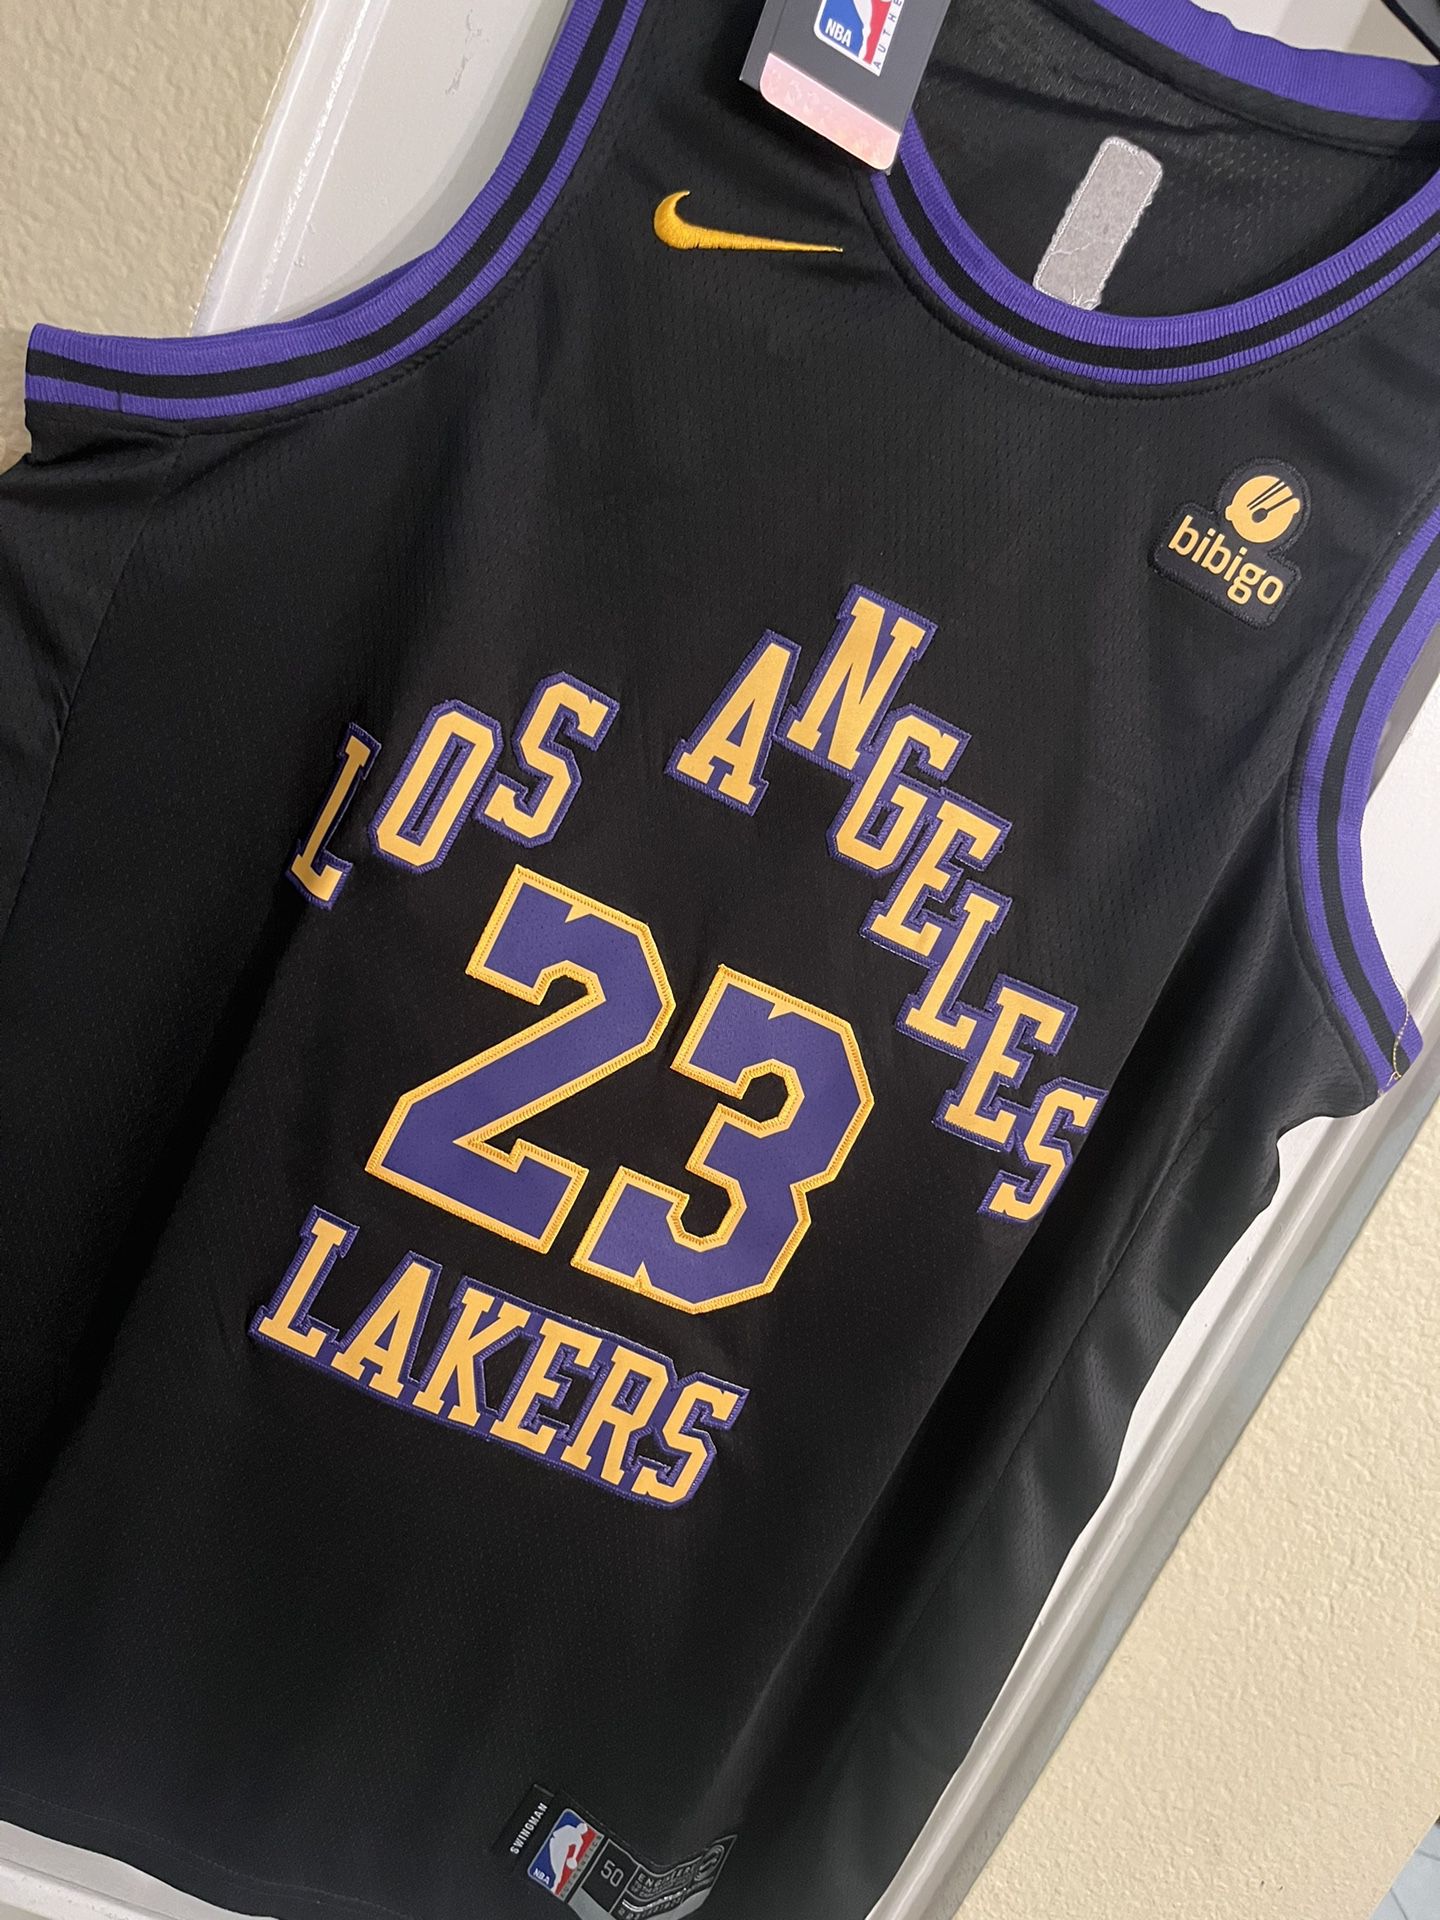 Lakers “James” Jersey -Large 